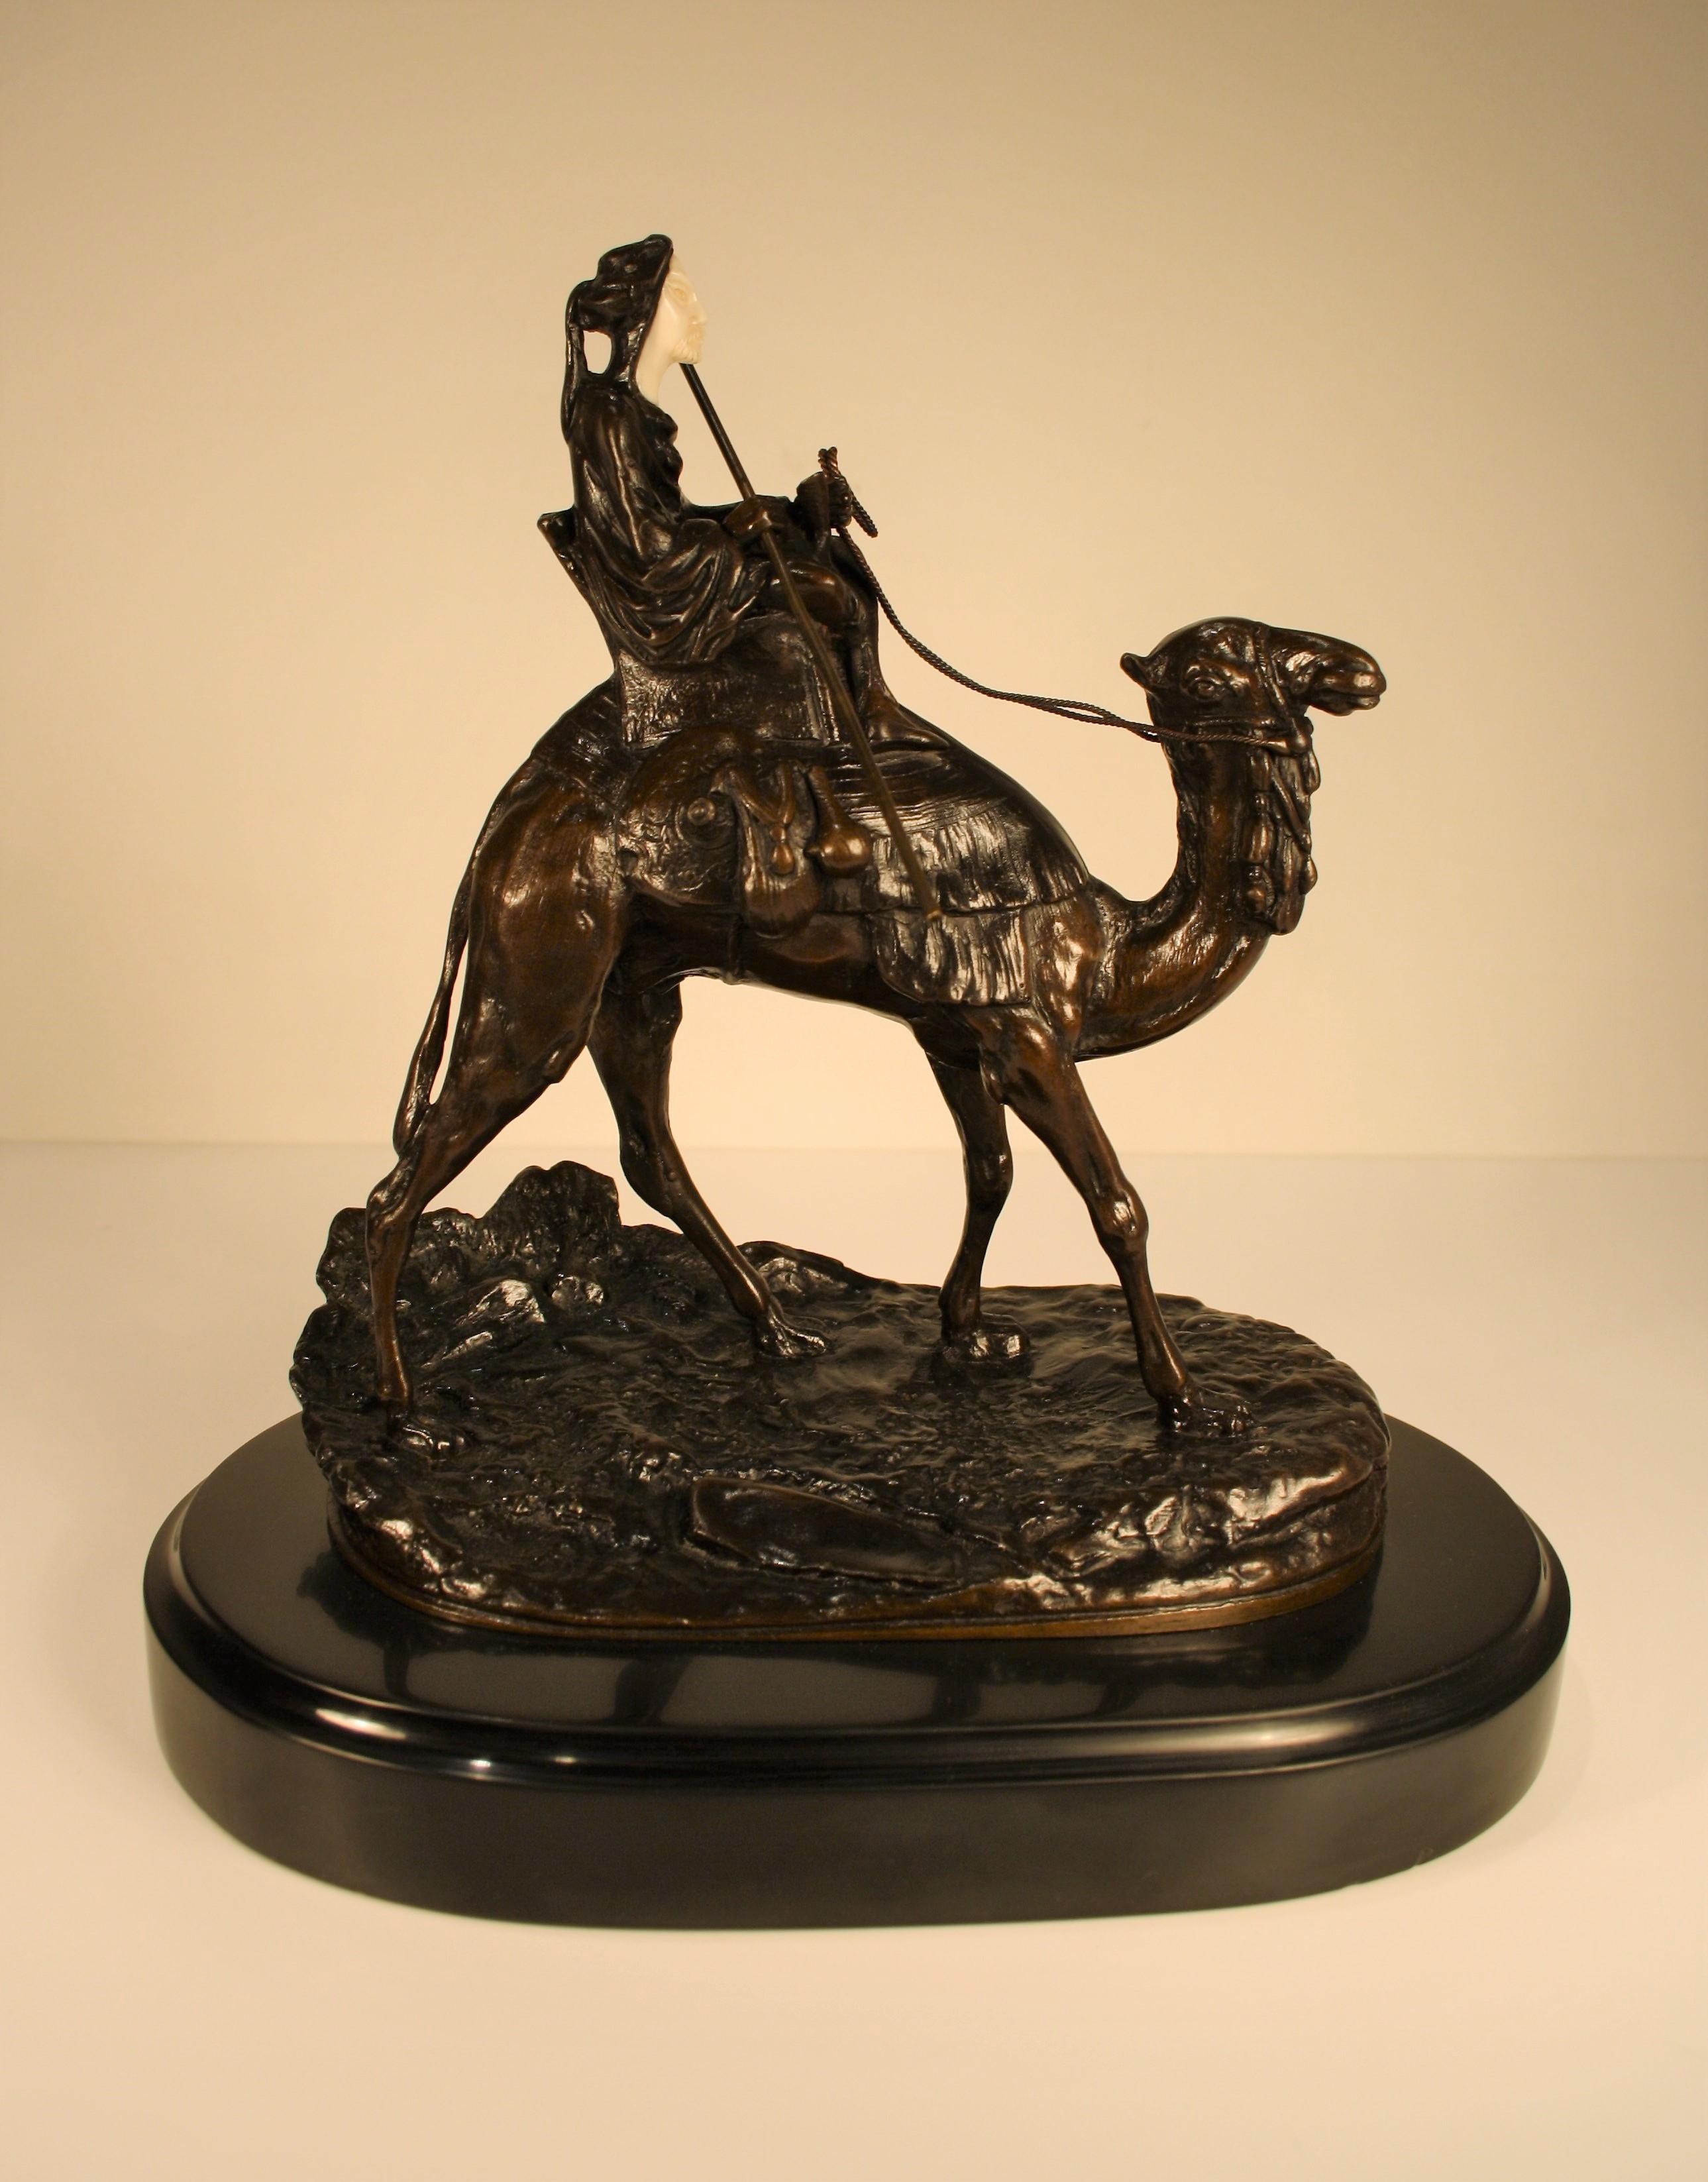 A bronze sculpture on a black marble base by the French sculptor Agathon Leonard (1841-1923) depicts a beduin on camelback.
Signed A. Léonard on the base.   
  